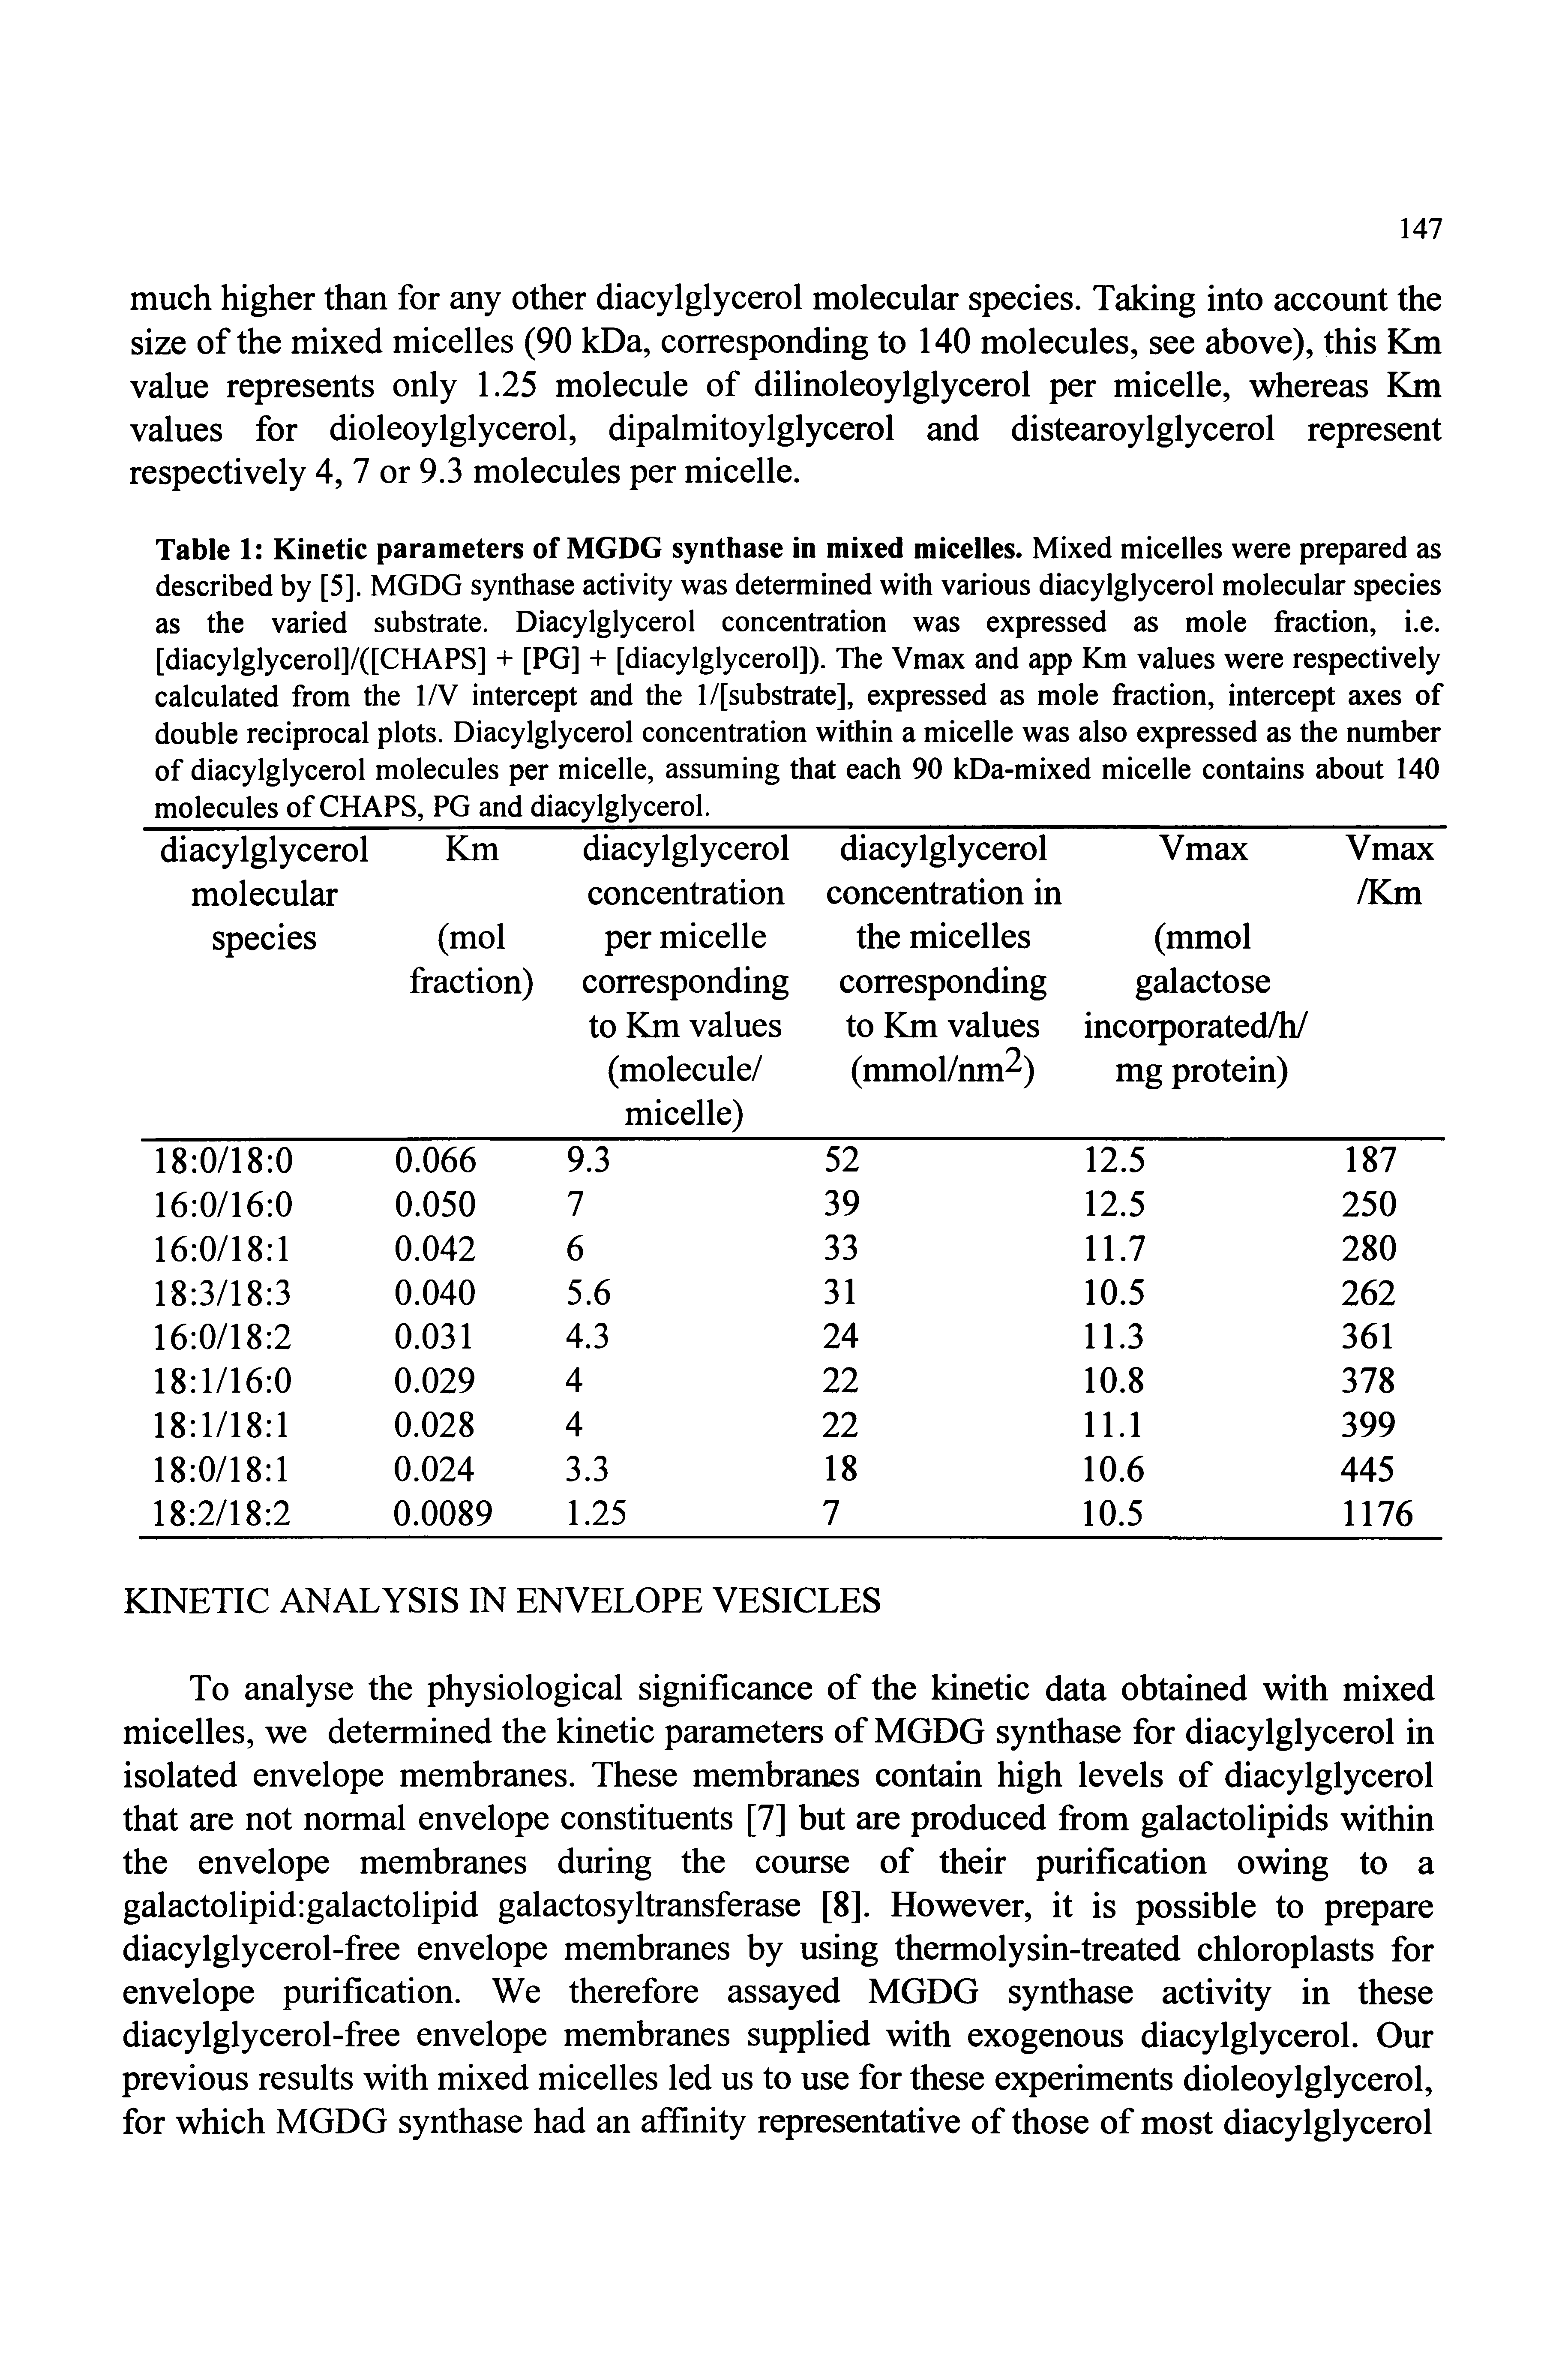 Table 1 Kinetic parameters of MGDG synthase in mixed micelles. Mixed micelles were prepared as described by [5]. MGDG synthase activity was determined with various diacylglycerol molecular species as the varied substrate. Diacylglycerol concentration was expressed as mole fraction, i.e. [diacylglycerol]/([CHAPS] + [PG] -i- [diacylglycerol]). The Vmax and app Km values were respectively calculated from the IfV intercept and the 1/[substrate], expressed as mole fraction, intercept axes of double reciprocal plots. Diacylglycerol concentration within a micelle was also expressed as the number of diacylglycerol molecules per micelle, assuming that each 90 kDa-mixed micelle contains about 140 molecules of CHAPS, PG and diacylglycerol.